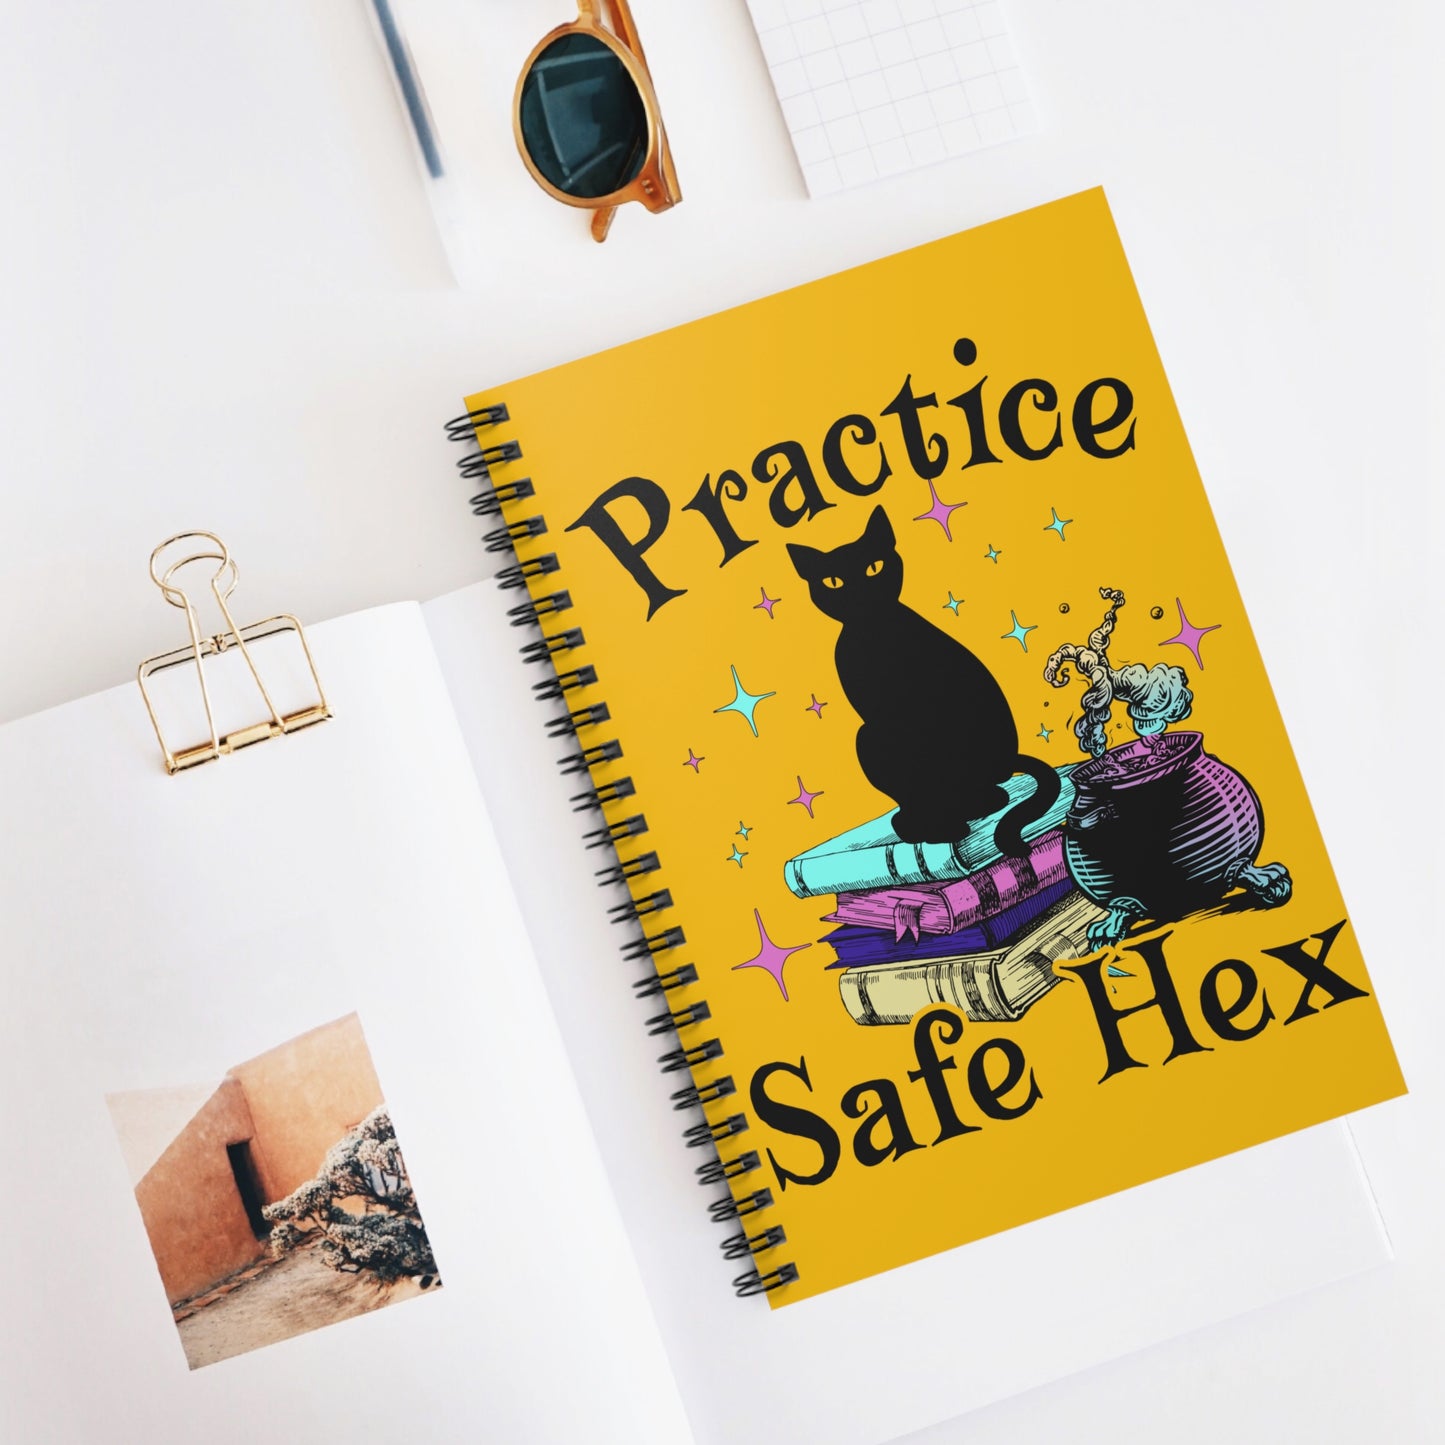 Practice Safe Hex: Spiral Notebook - Log Books - Journals - Diaries - and More Custom Printed by TheGlassyLass.com